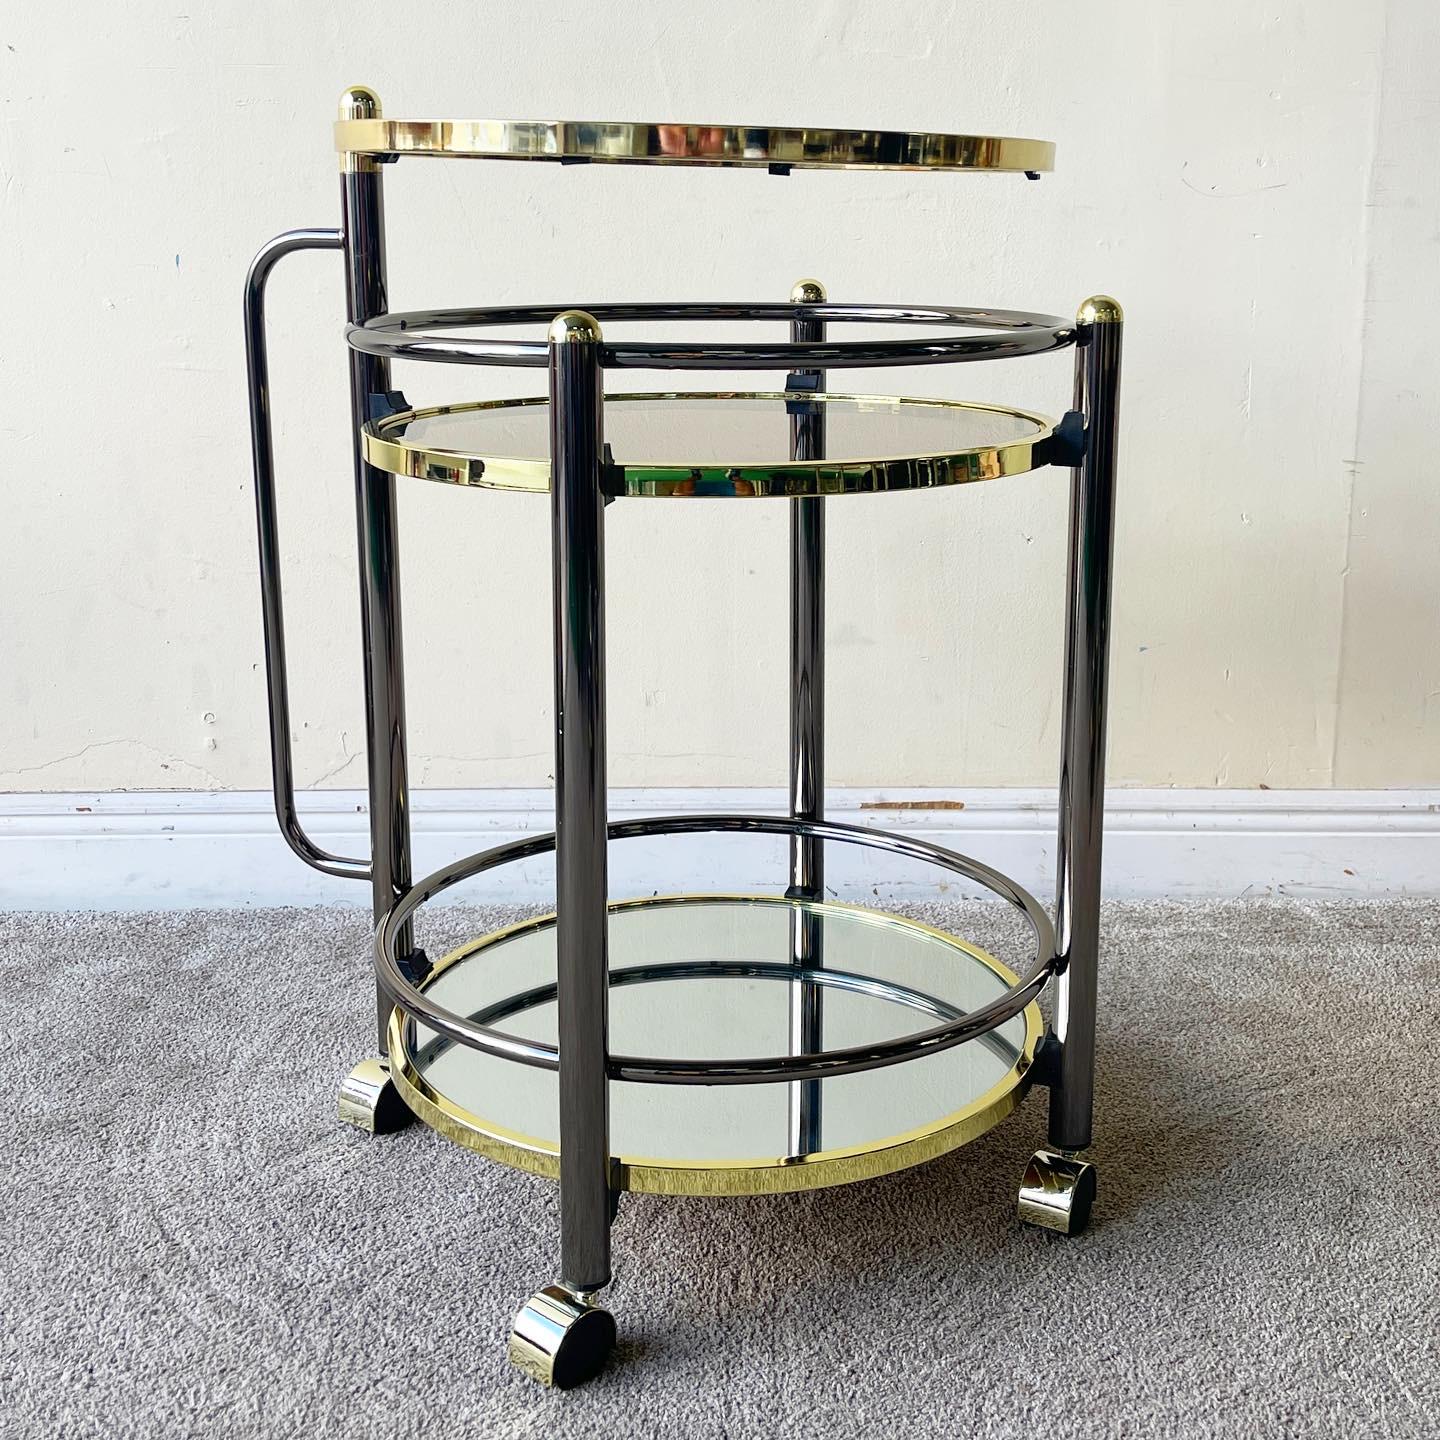 Incredible regency style bar/beverage cart. Top table swivels 360 degrees. Top two tiers feature a smoked glass with a mirrored bottom tier.

Additional Information:
Material: Glass, Metal
Color: Charcoal, Gold
Style: Hollywood Regency,